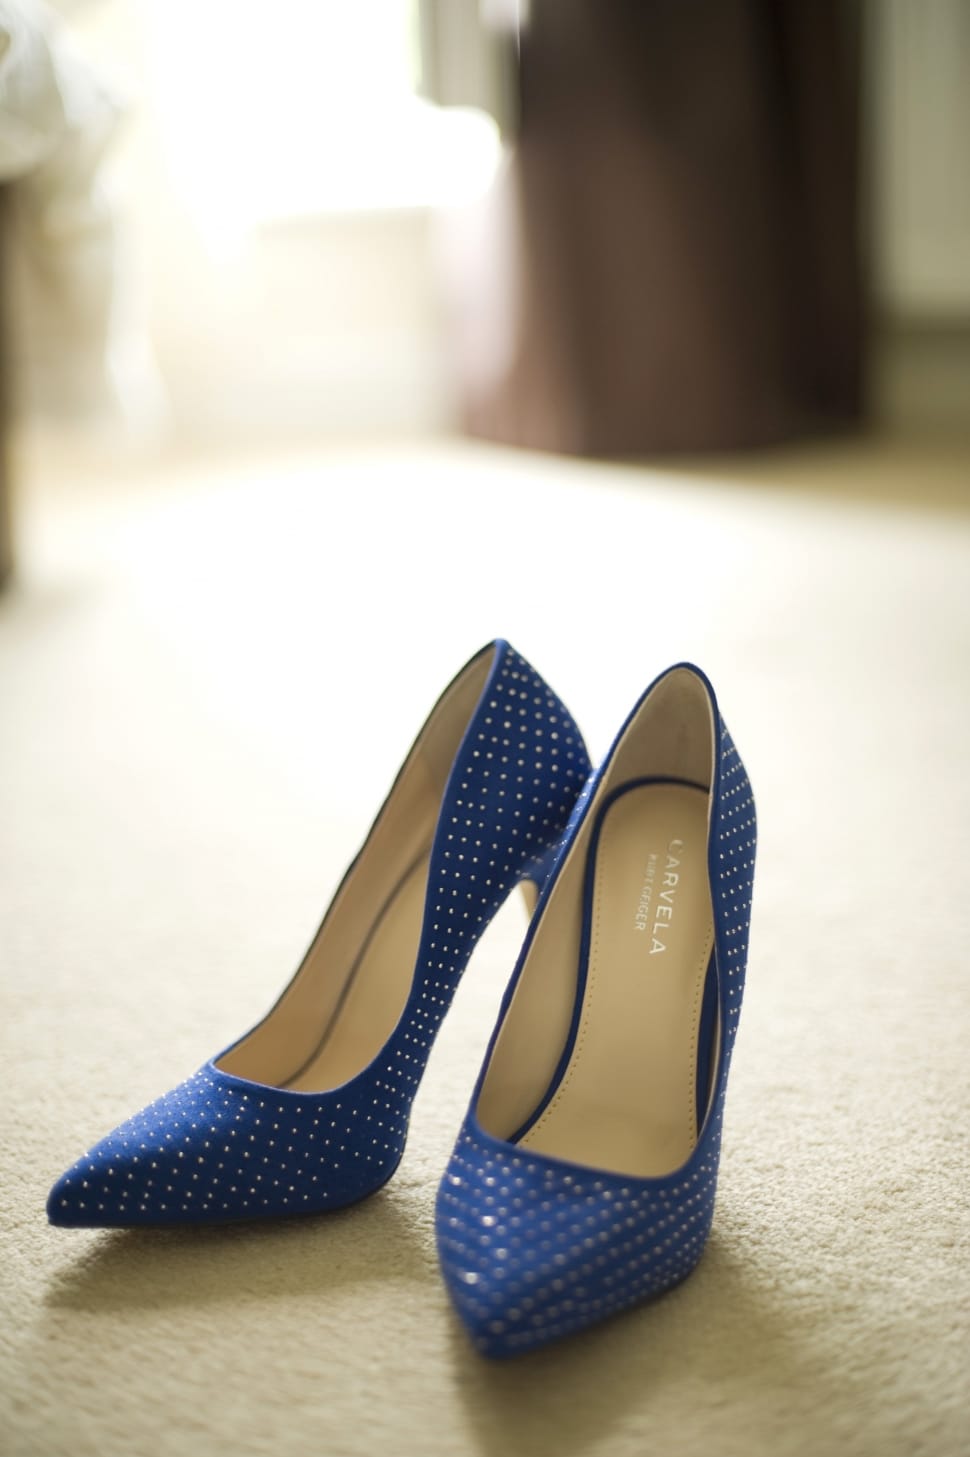 pair of blue and white polka dot leather pointed stiletto preview